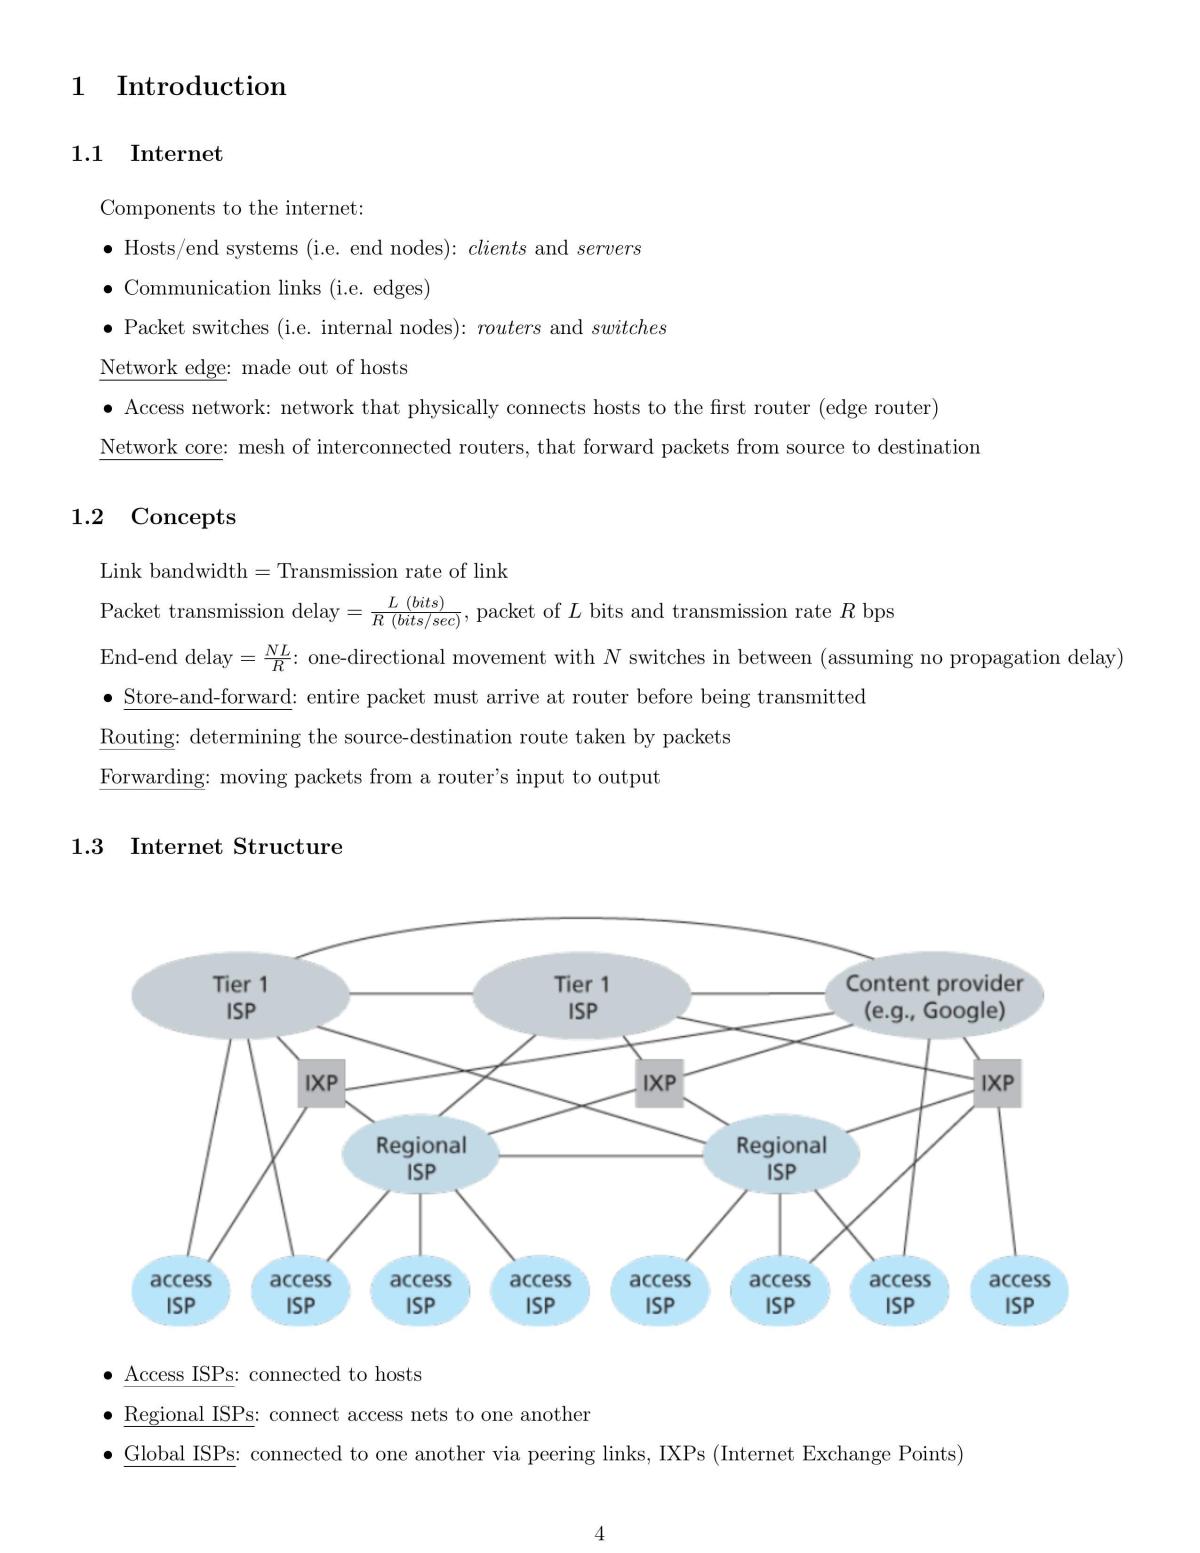 Introduction to Computer Networks Full Notes - Page 3